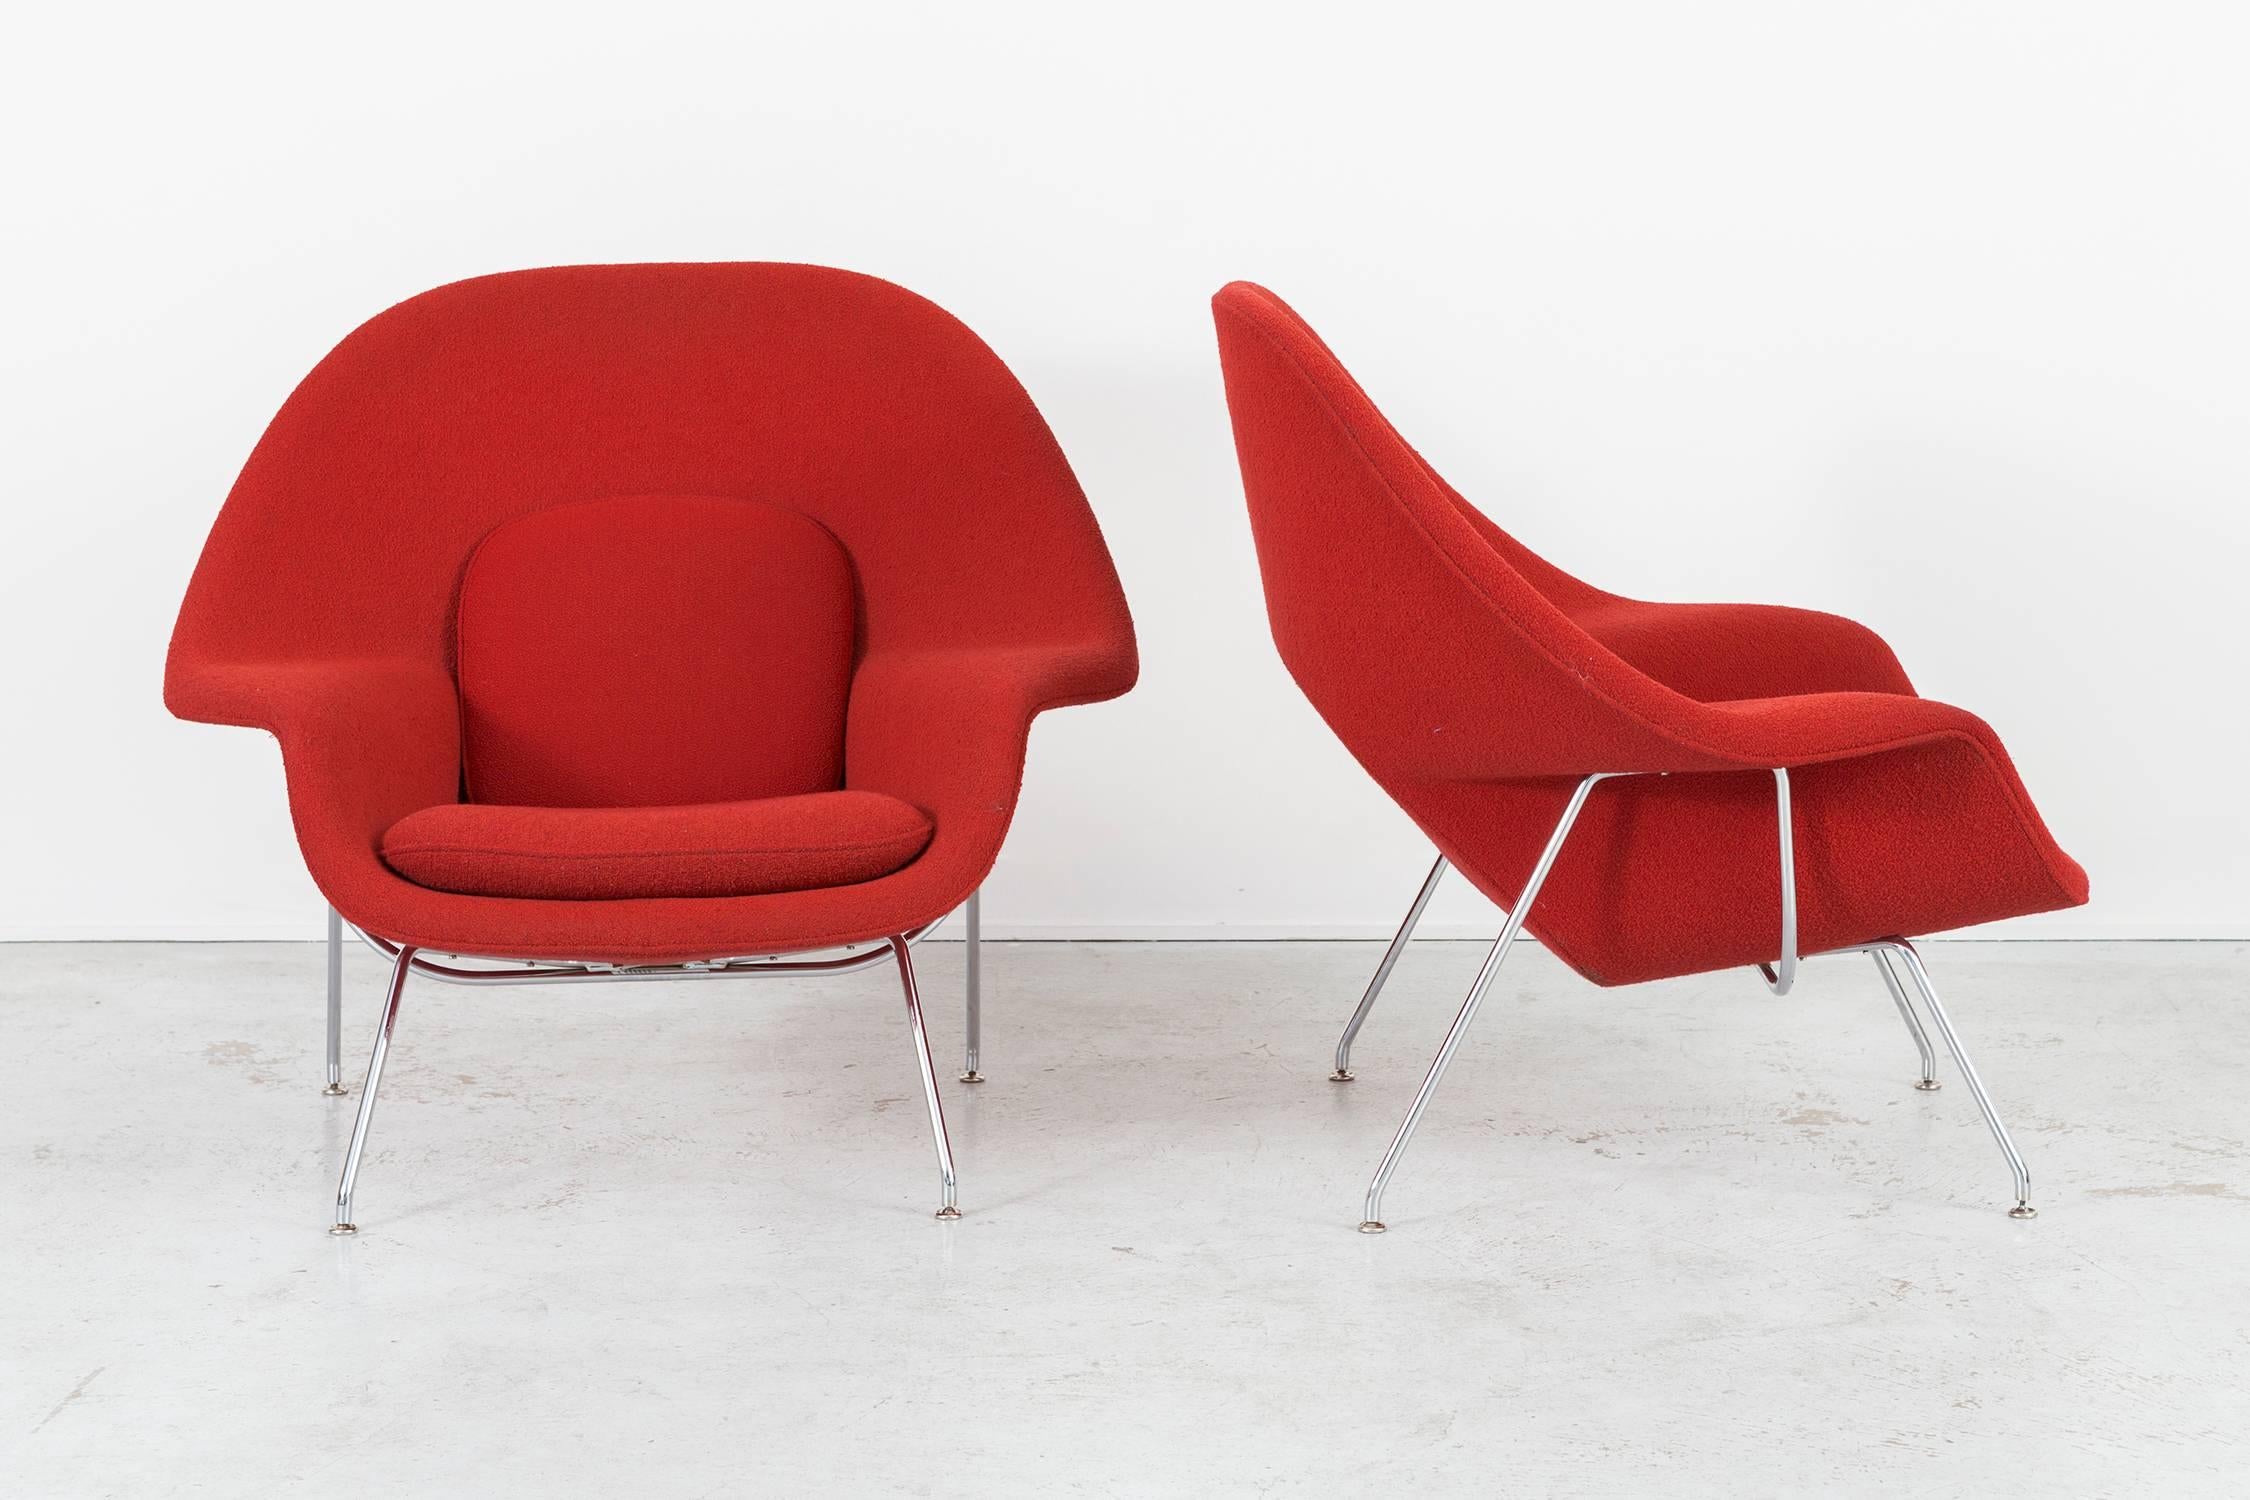 Set of two Womb chairs

Designed by Eero Saarinen for Knoll

USA, d 1948 / circa 1960s

original upholstery + steel frame

Measures: 37